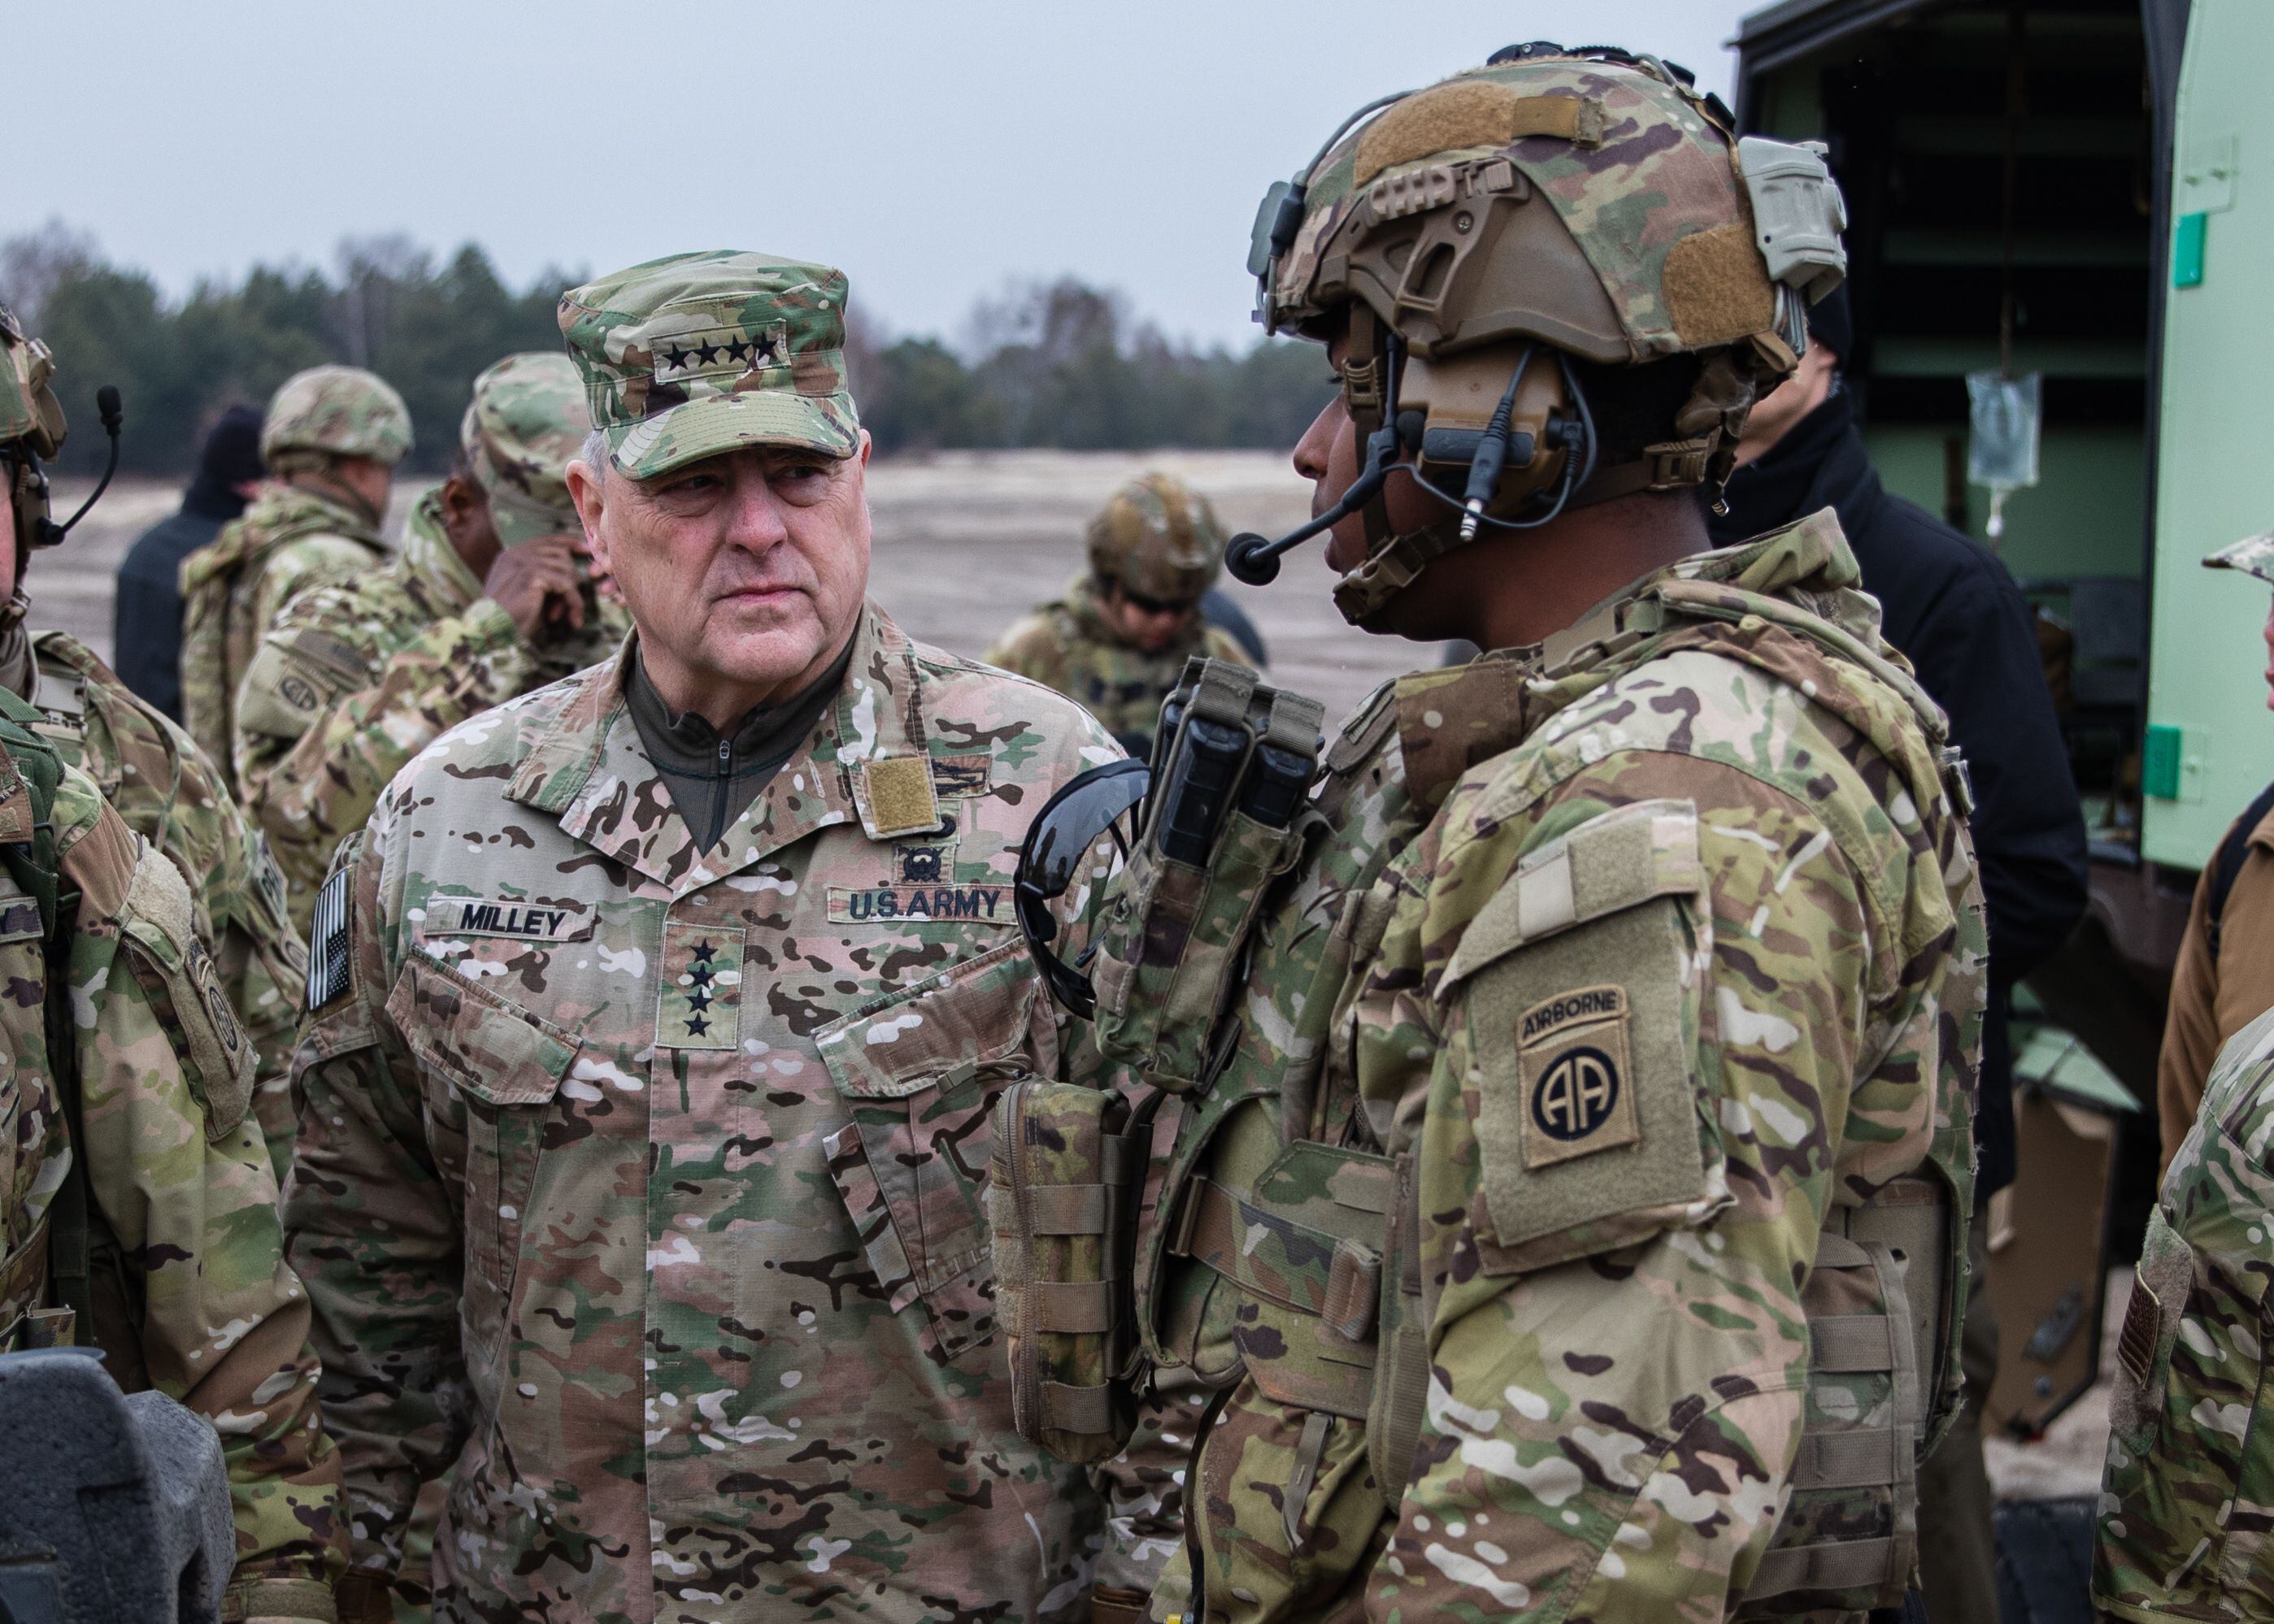 Gen. Mark Milley, chairman of the Joint Chiefs of Staff, speaks with a paratrooper assigned to the 82nd Airborne Division during a visit to Nowa Deba, Poland, March 4, 2022. (Master Sgt. Alexander Burnett/Army)